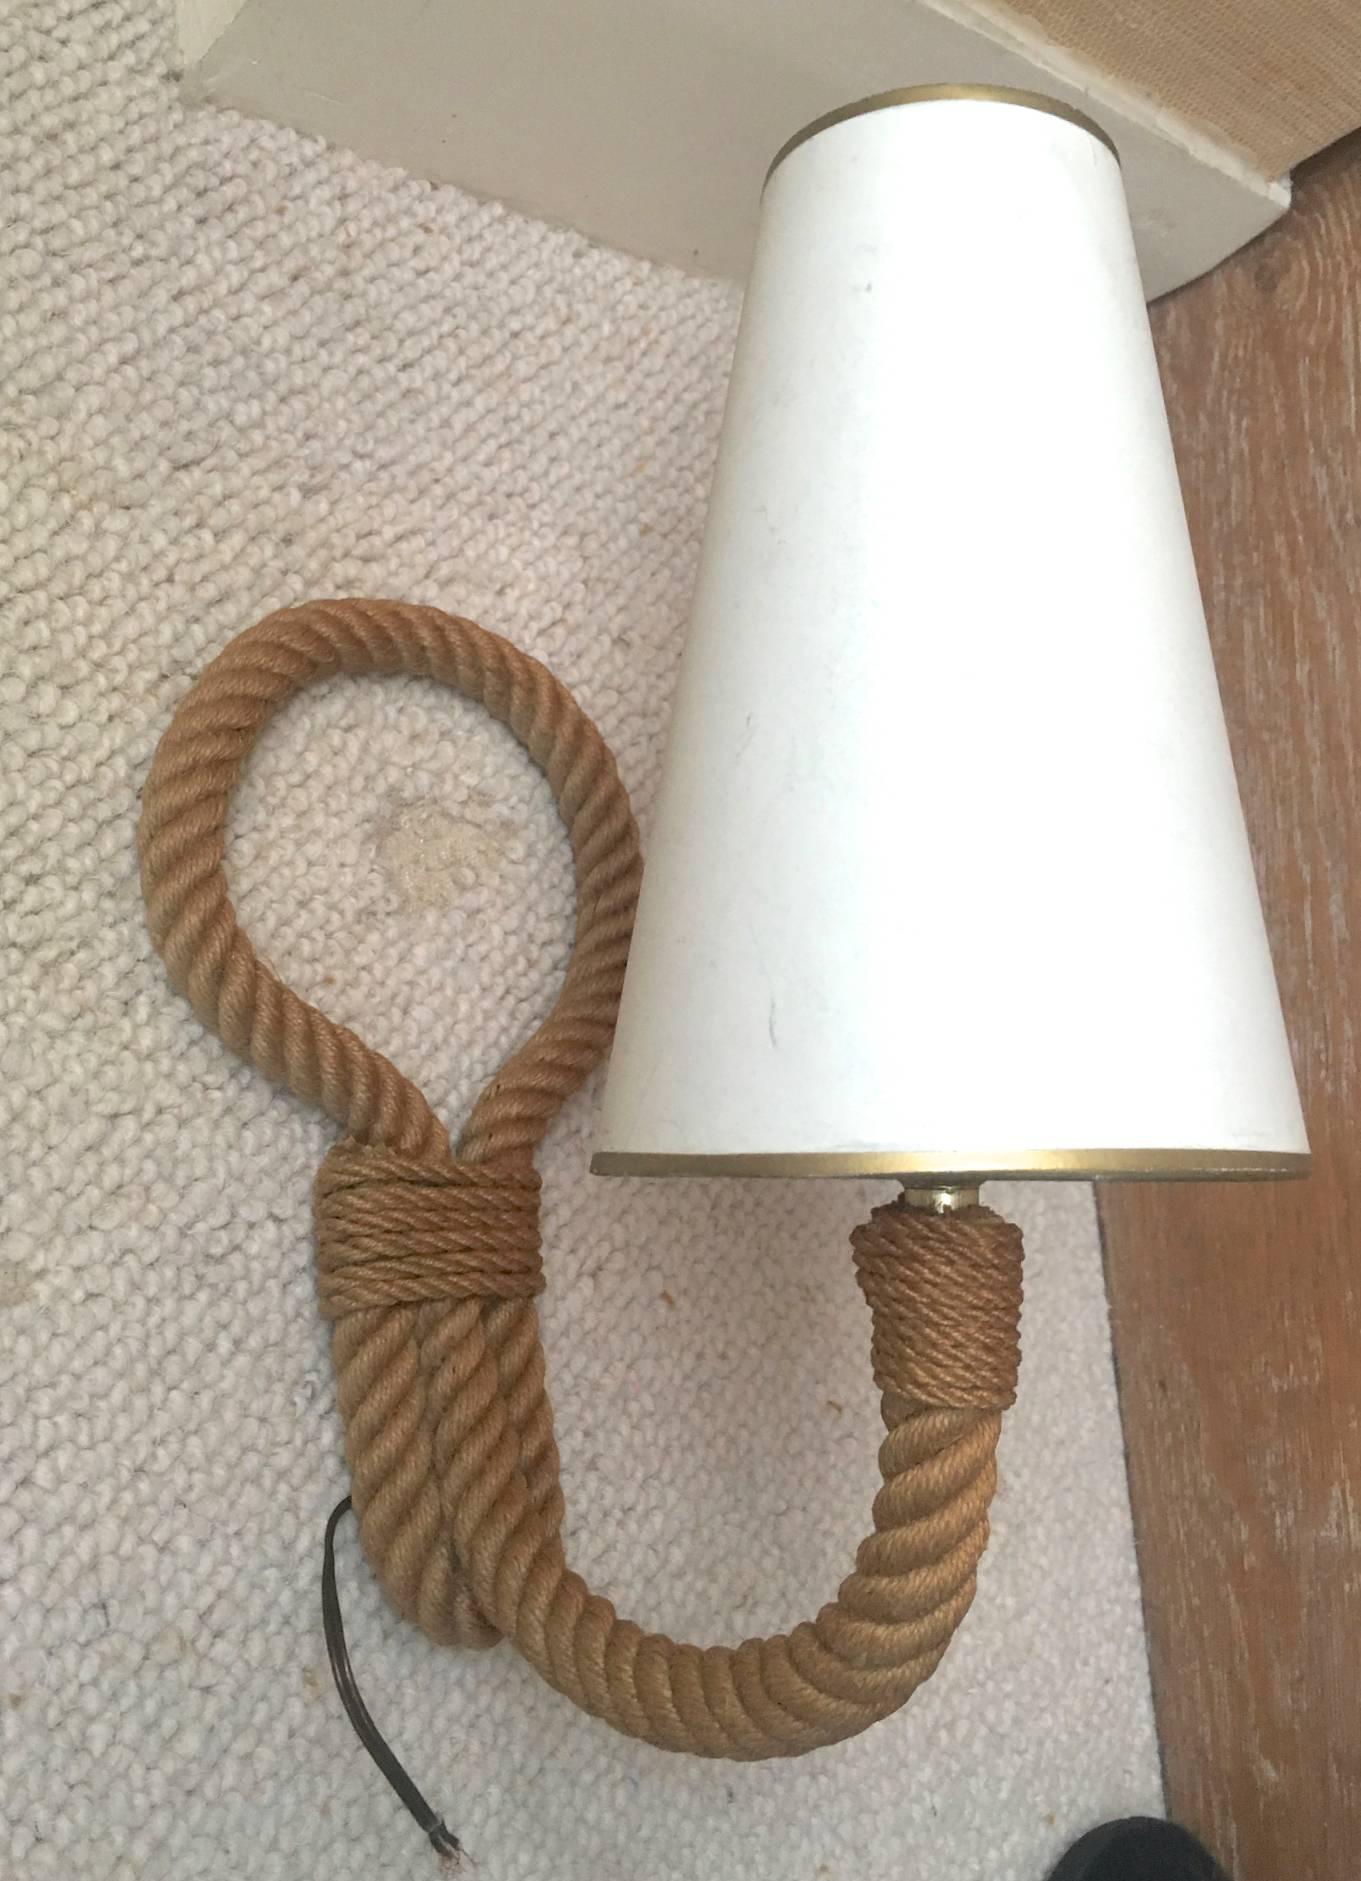 Audoux Minet French riviera pair of rope sconces in vintage good condition.